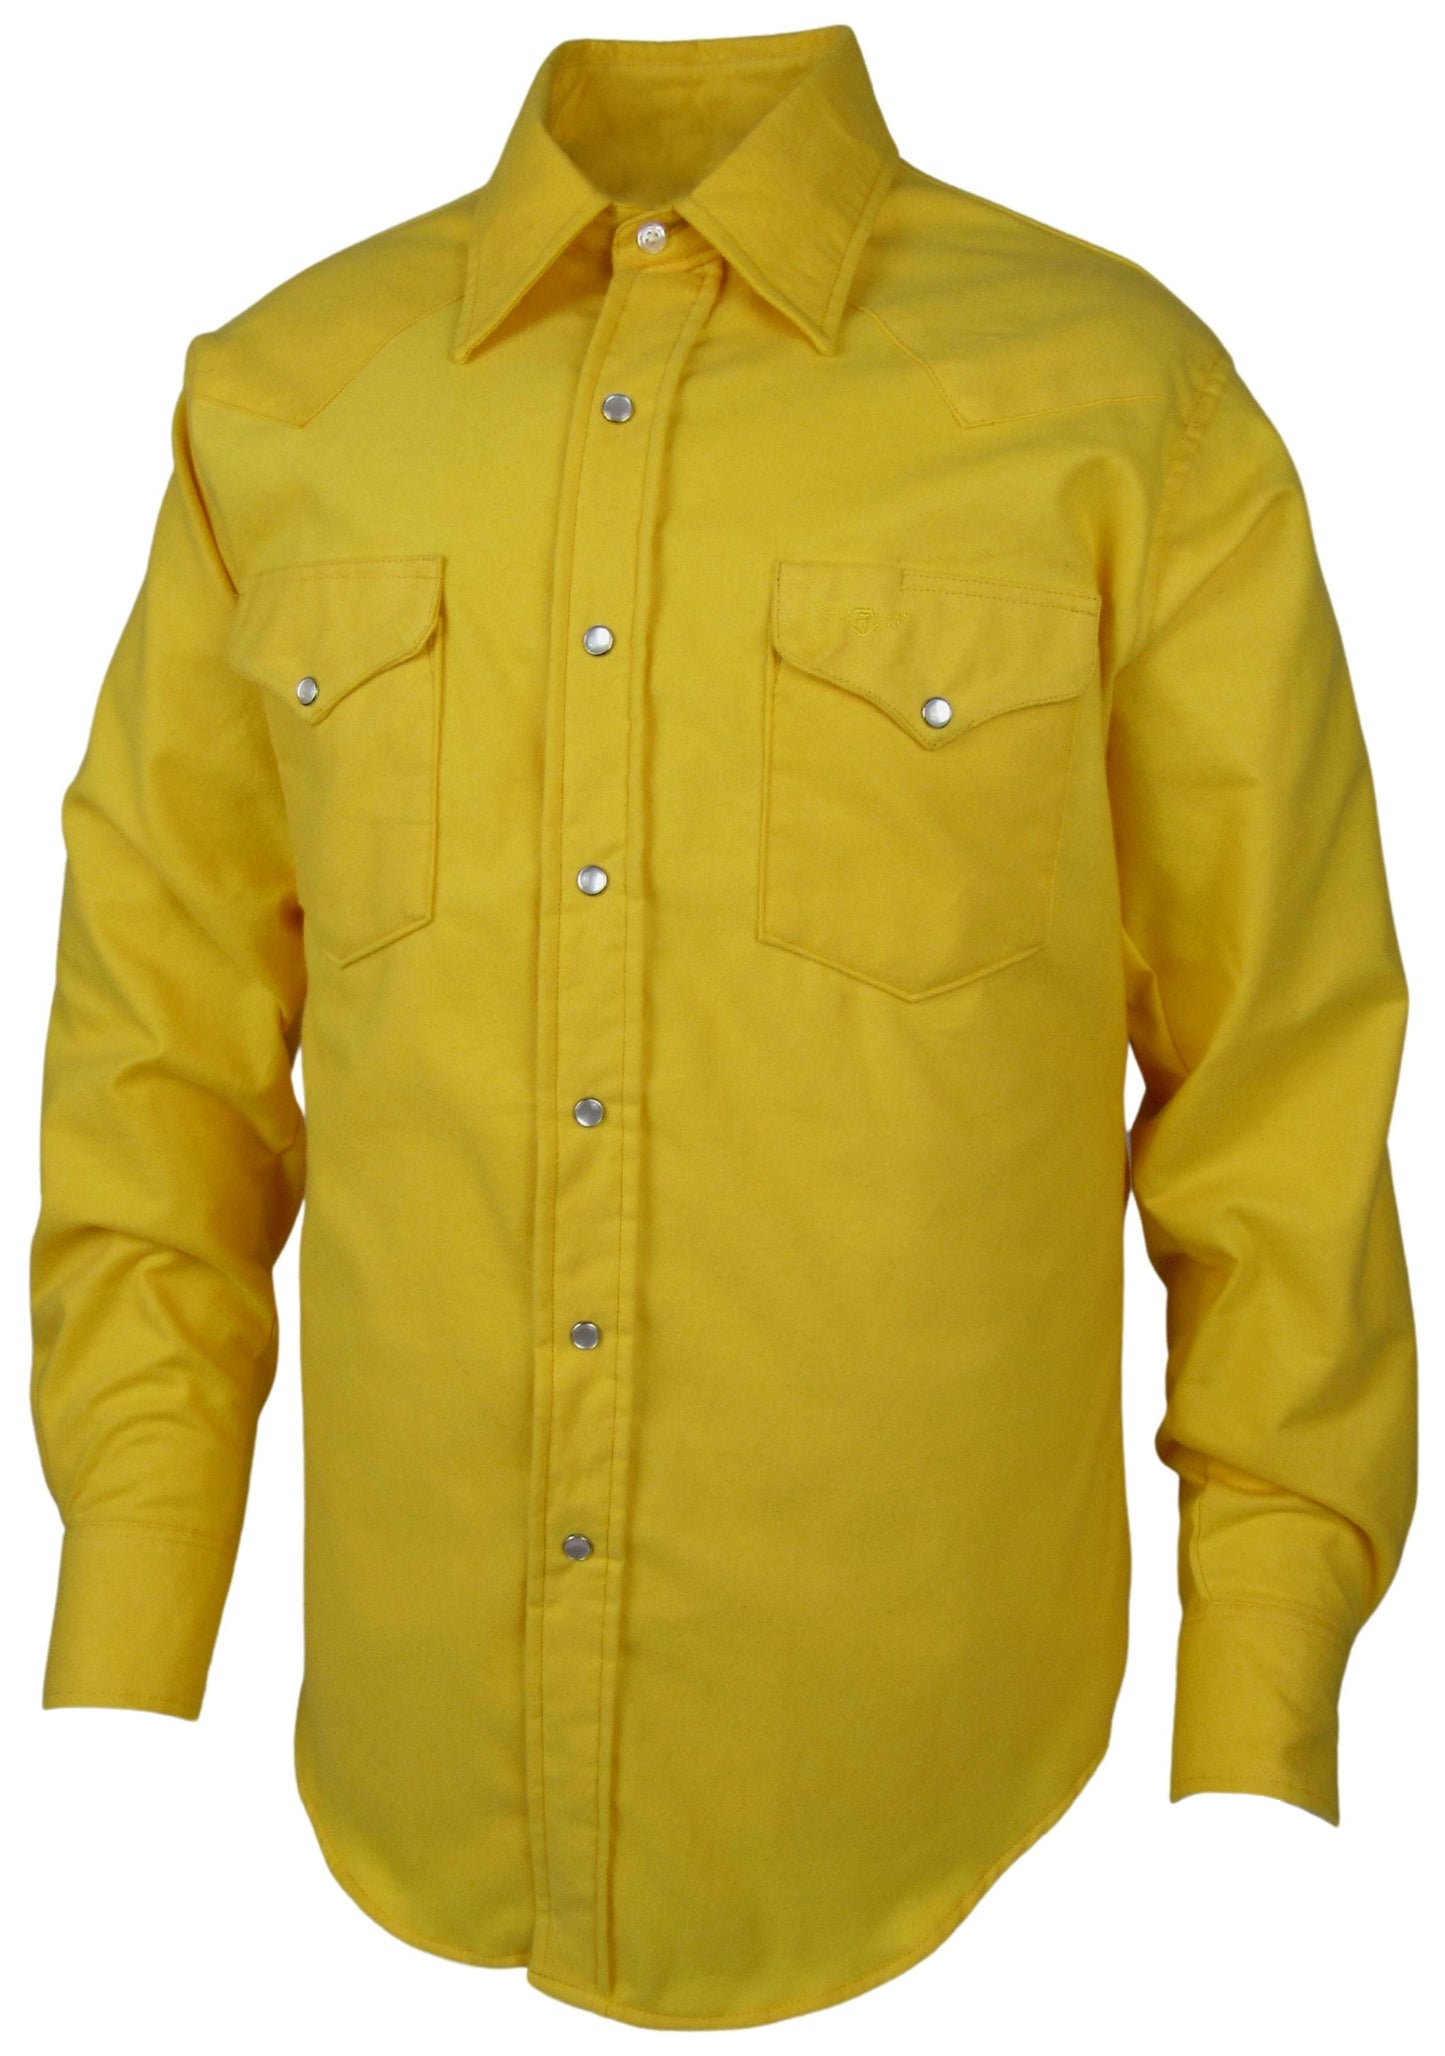 Flying R Ranchwear Solid Yellow flannel with snaps Made in USA